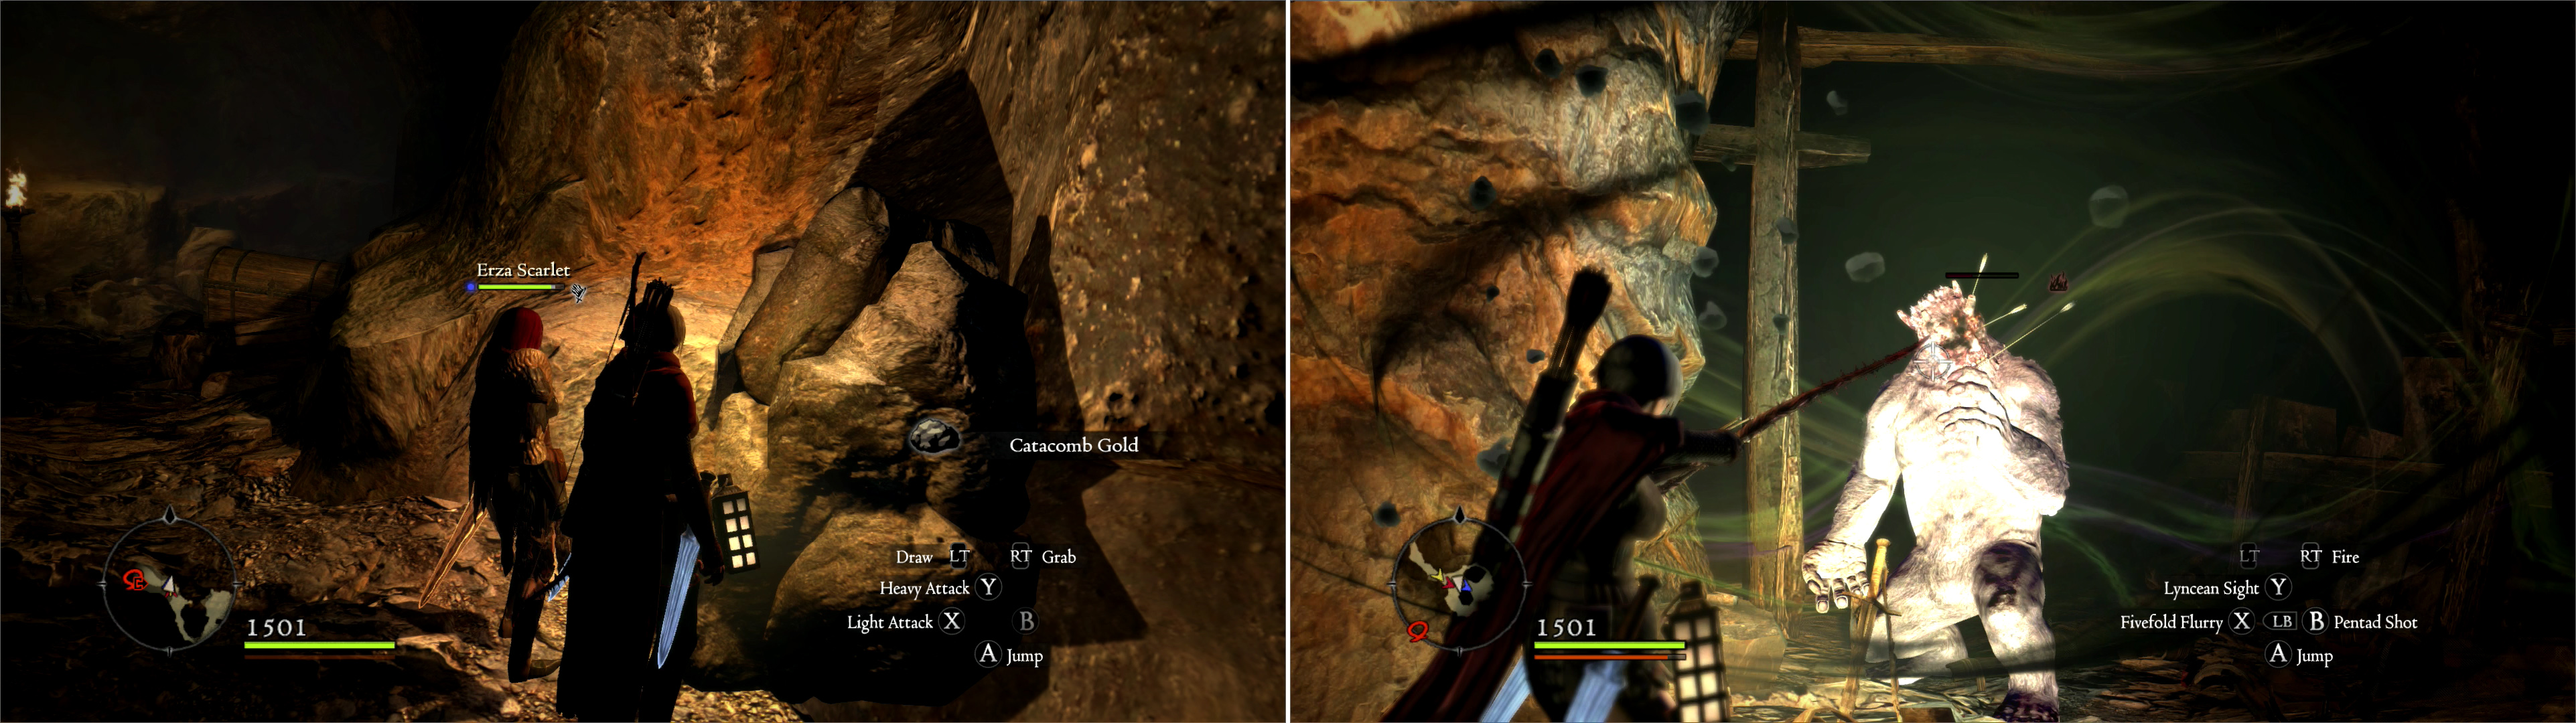 Ore veins can yield Catacomb Gold, which is unique to the Catacombs (left). An Ogre has set up a lair in some of the Catacomb’s natural caverns (right).